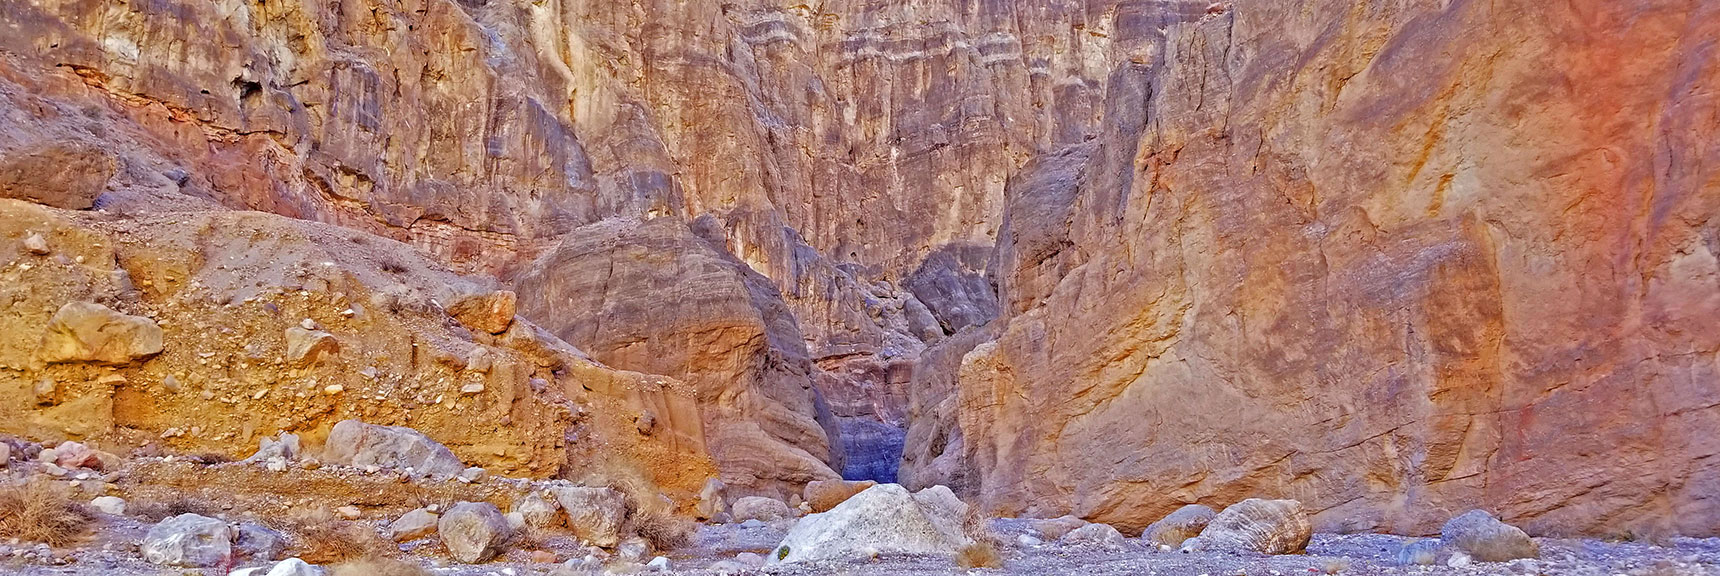 Lower Fall Canyon | Death Valley National Park, California